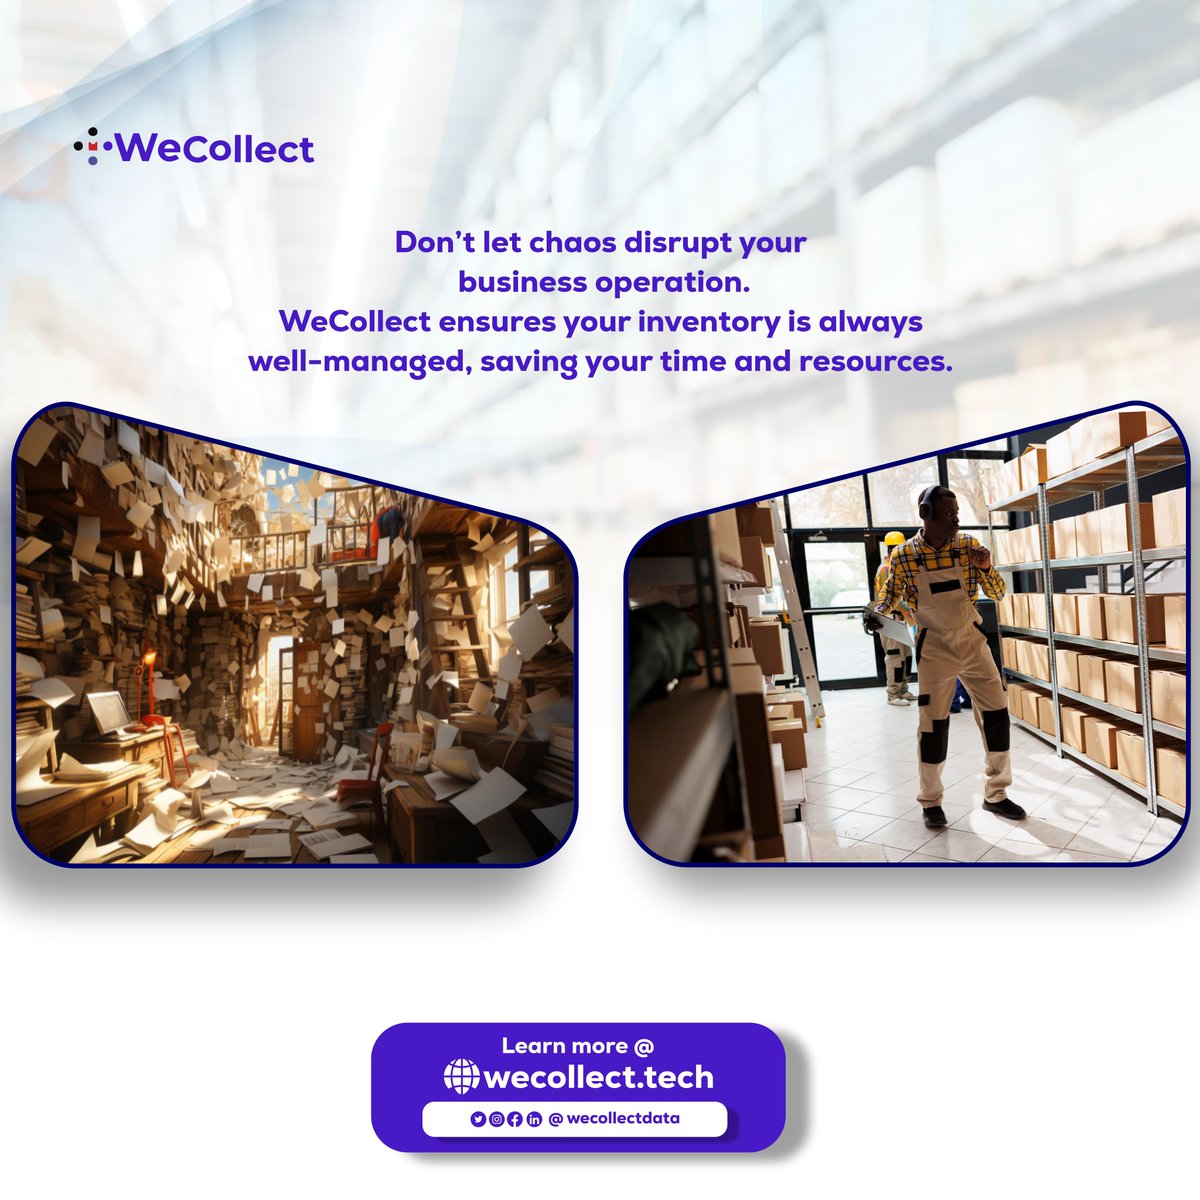 Dont let chaos disrupt your business operation. 
WeCollect ensures your inventory is always well-managed, saving your time and resources. #inventorymanagement #WeCollect